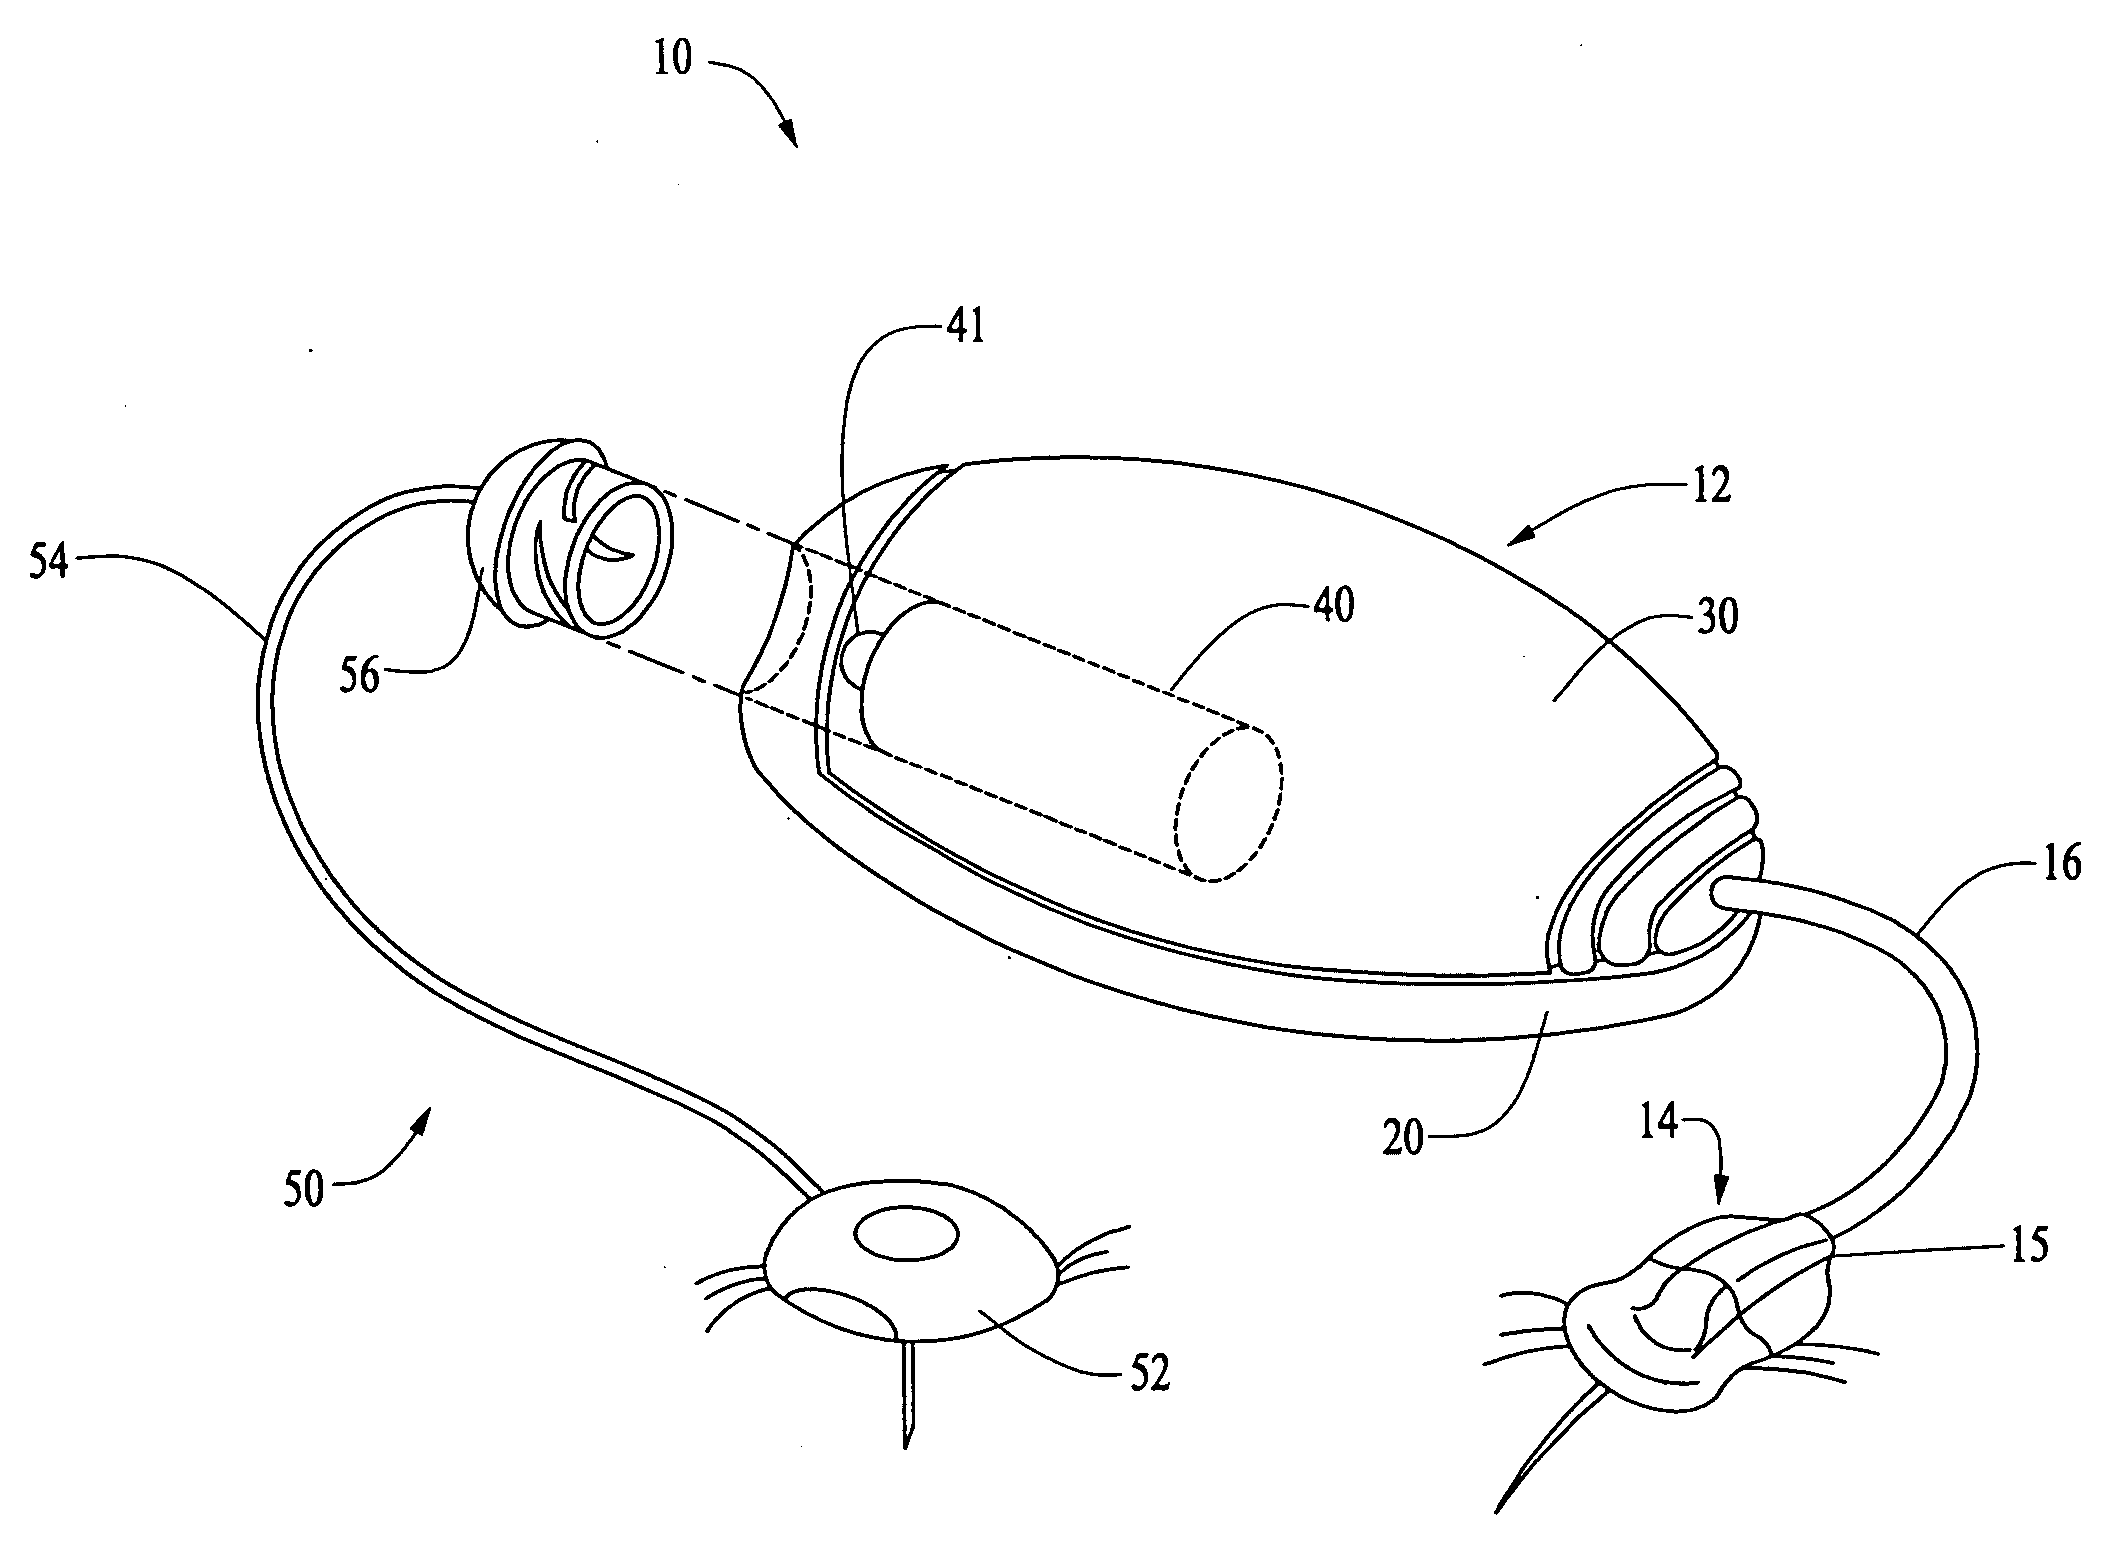 Needle insertion systems and methods